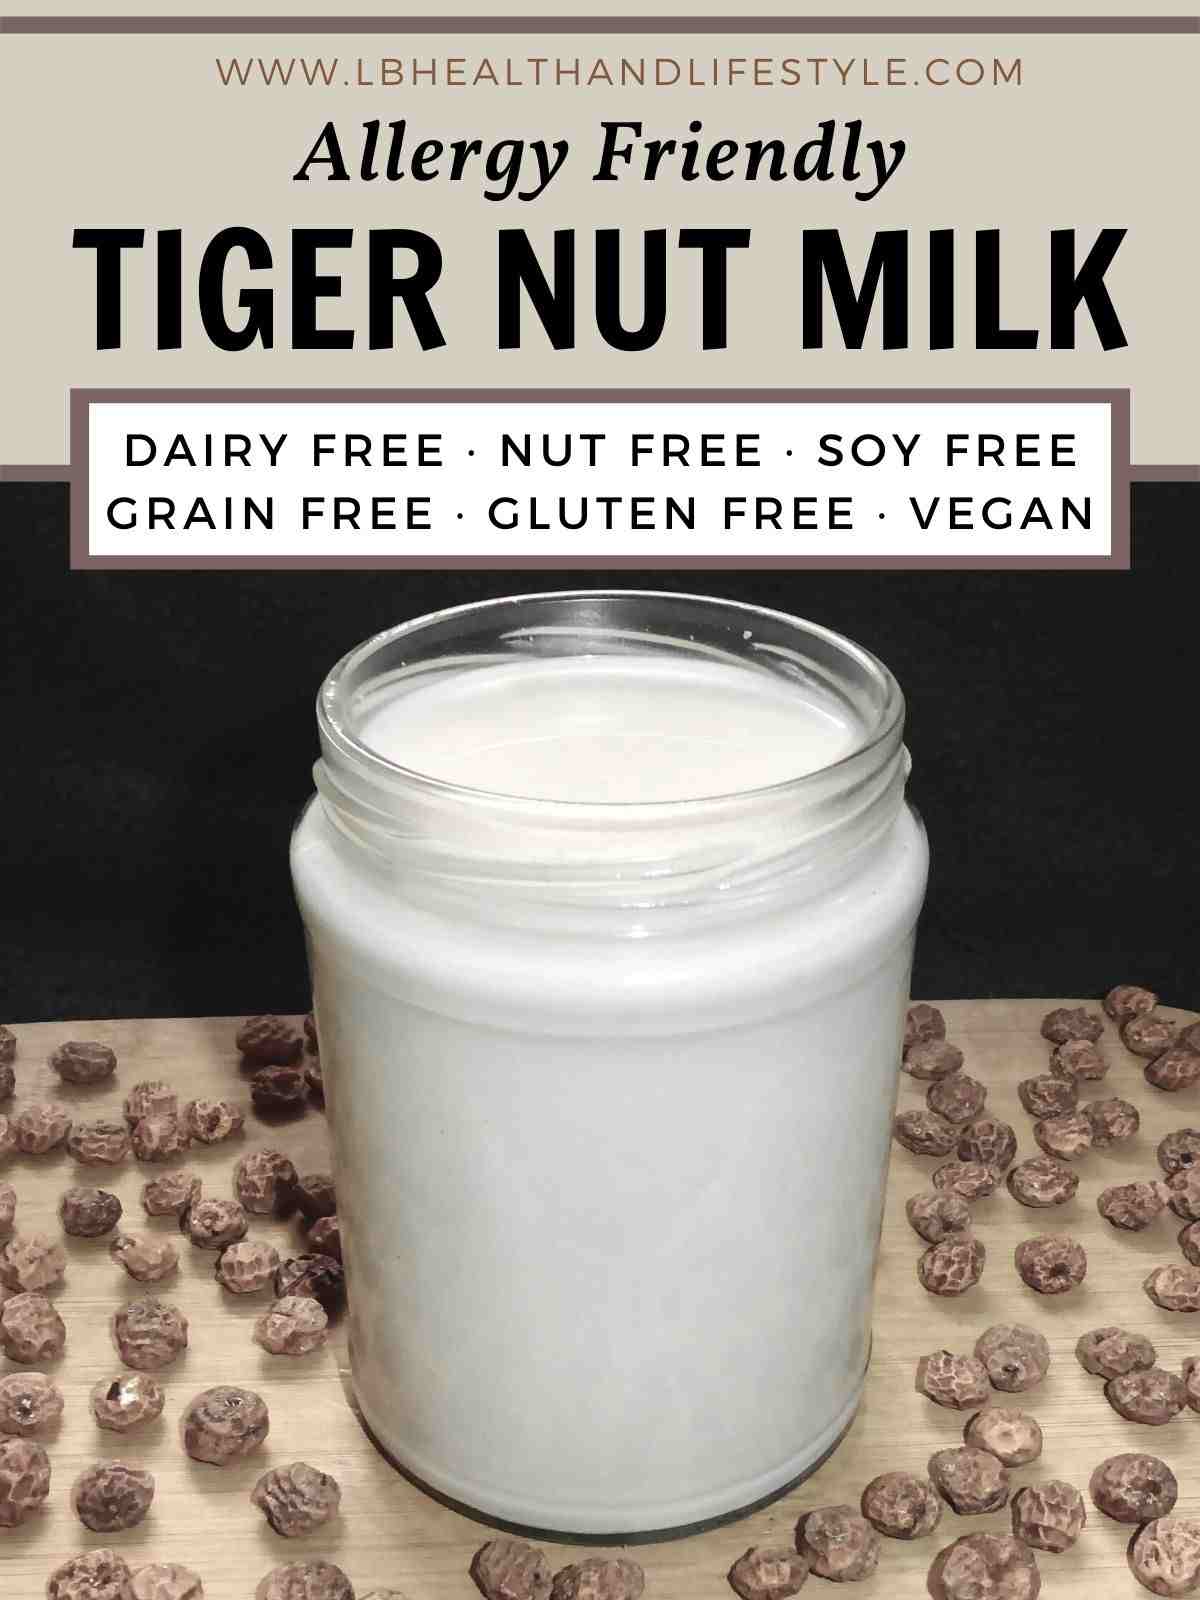 Allergy friendly tiger nut milk at the top. Dairy free, nut free, soy free, grain free, gluten free, vegan. Photo below of tiger but milk in glass jar on a bamboo board surrounded by tiger nuts.